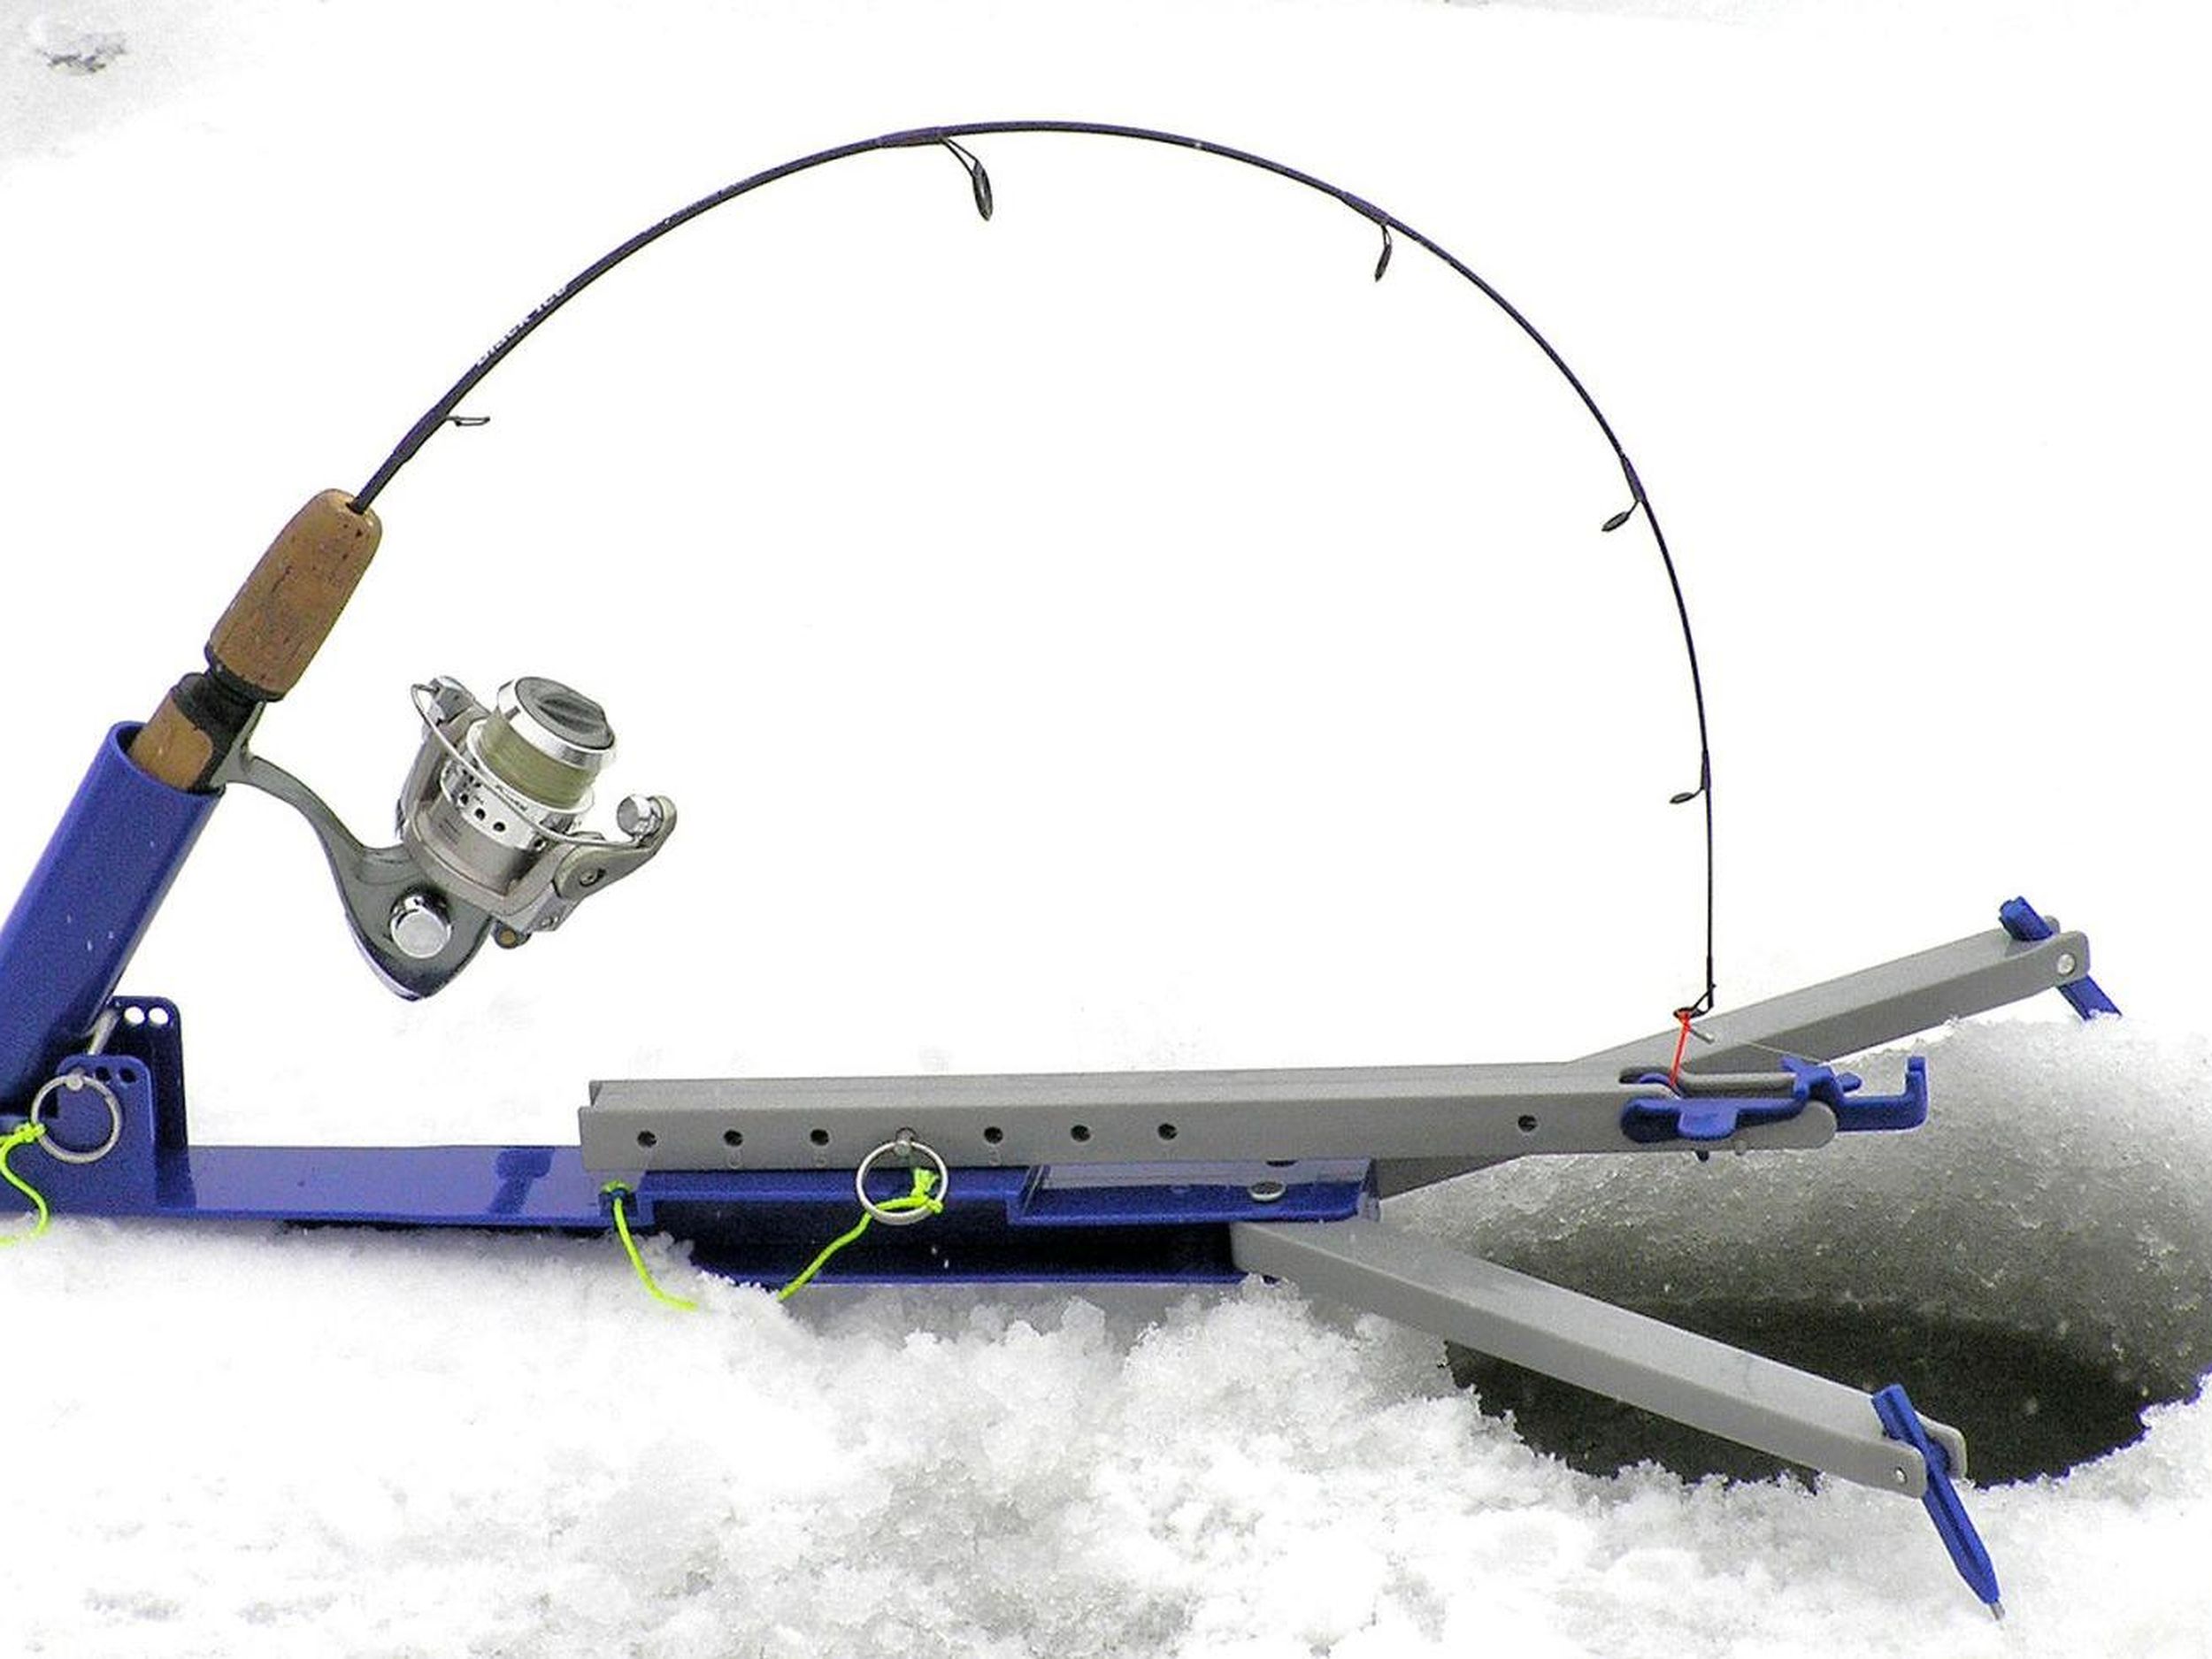 Idaho nurse manufactures popular ice-fishing device for setting the hook